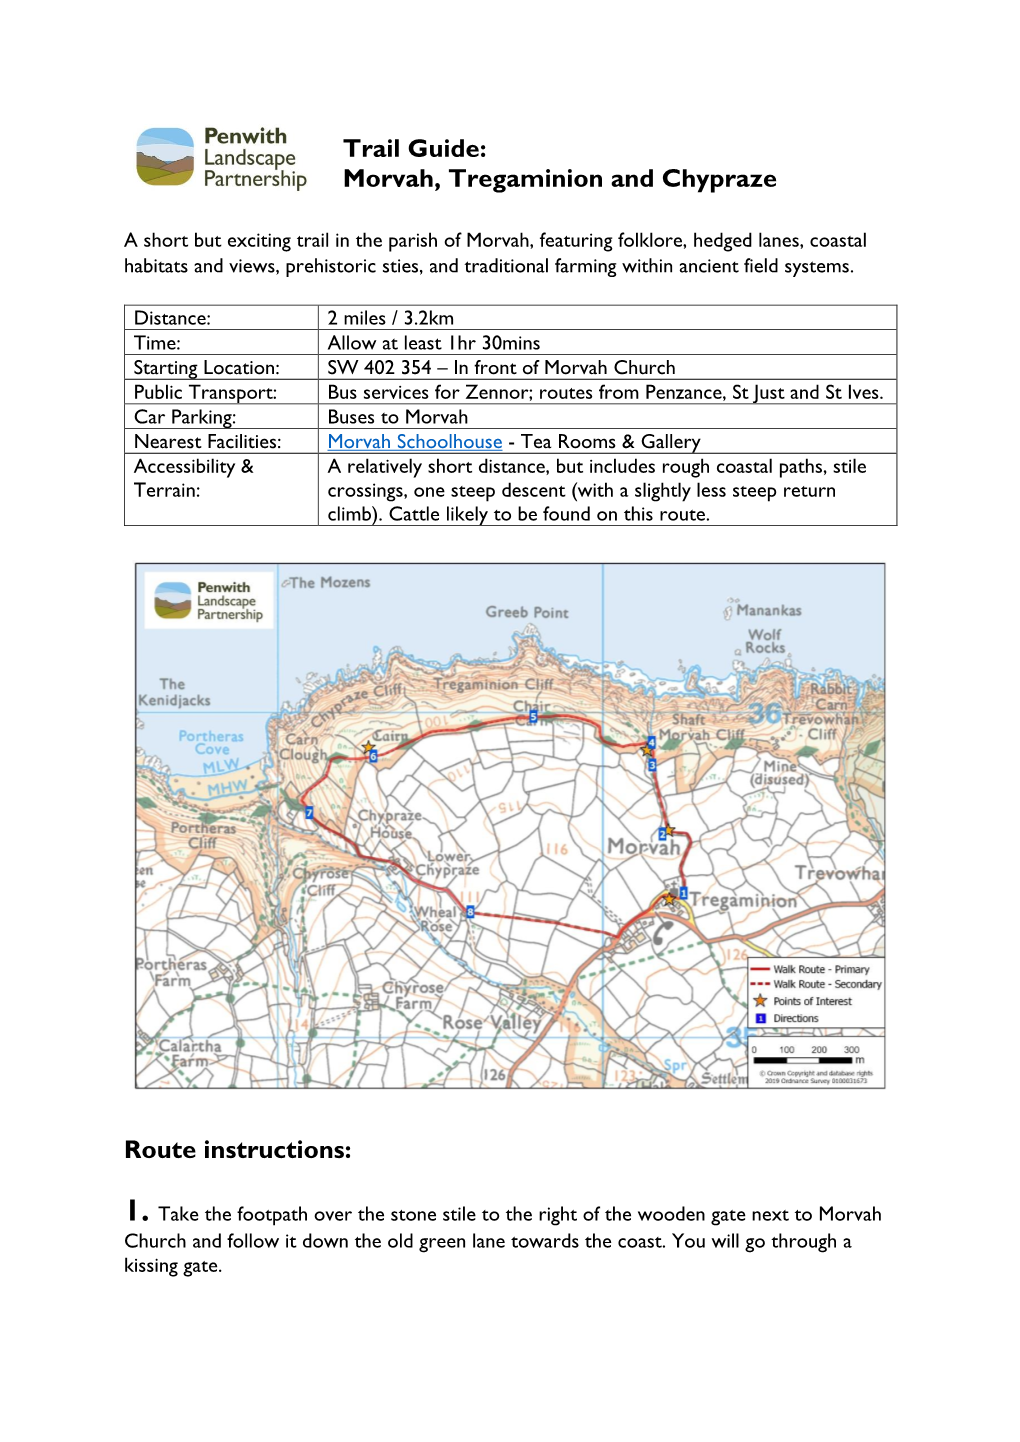 Trail Guide: Morvah, Tregaminion and Chypraze Route Instructions